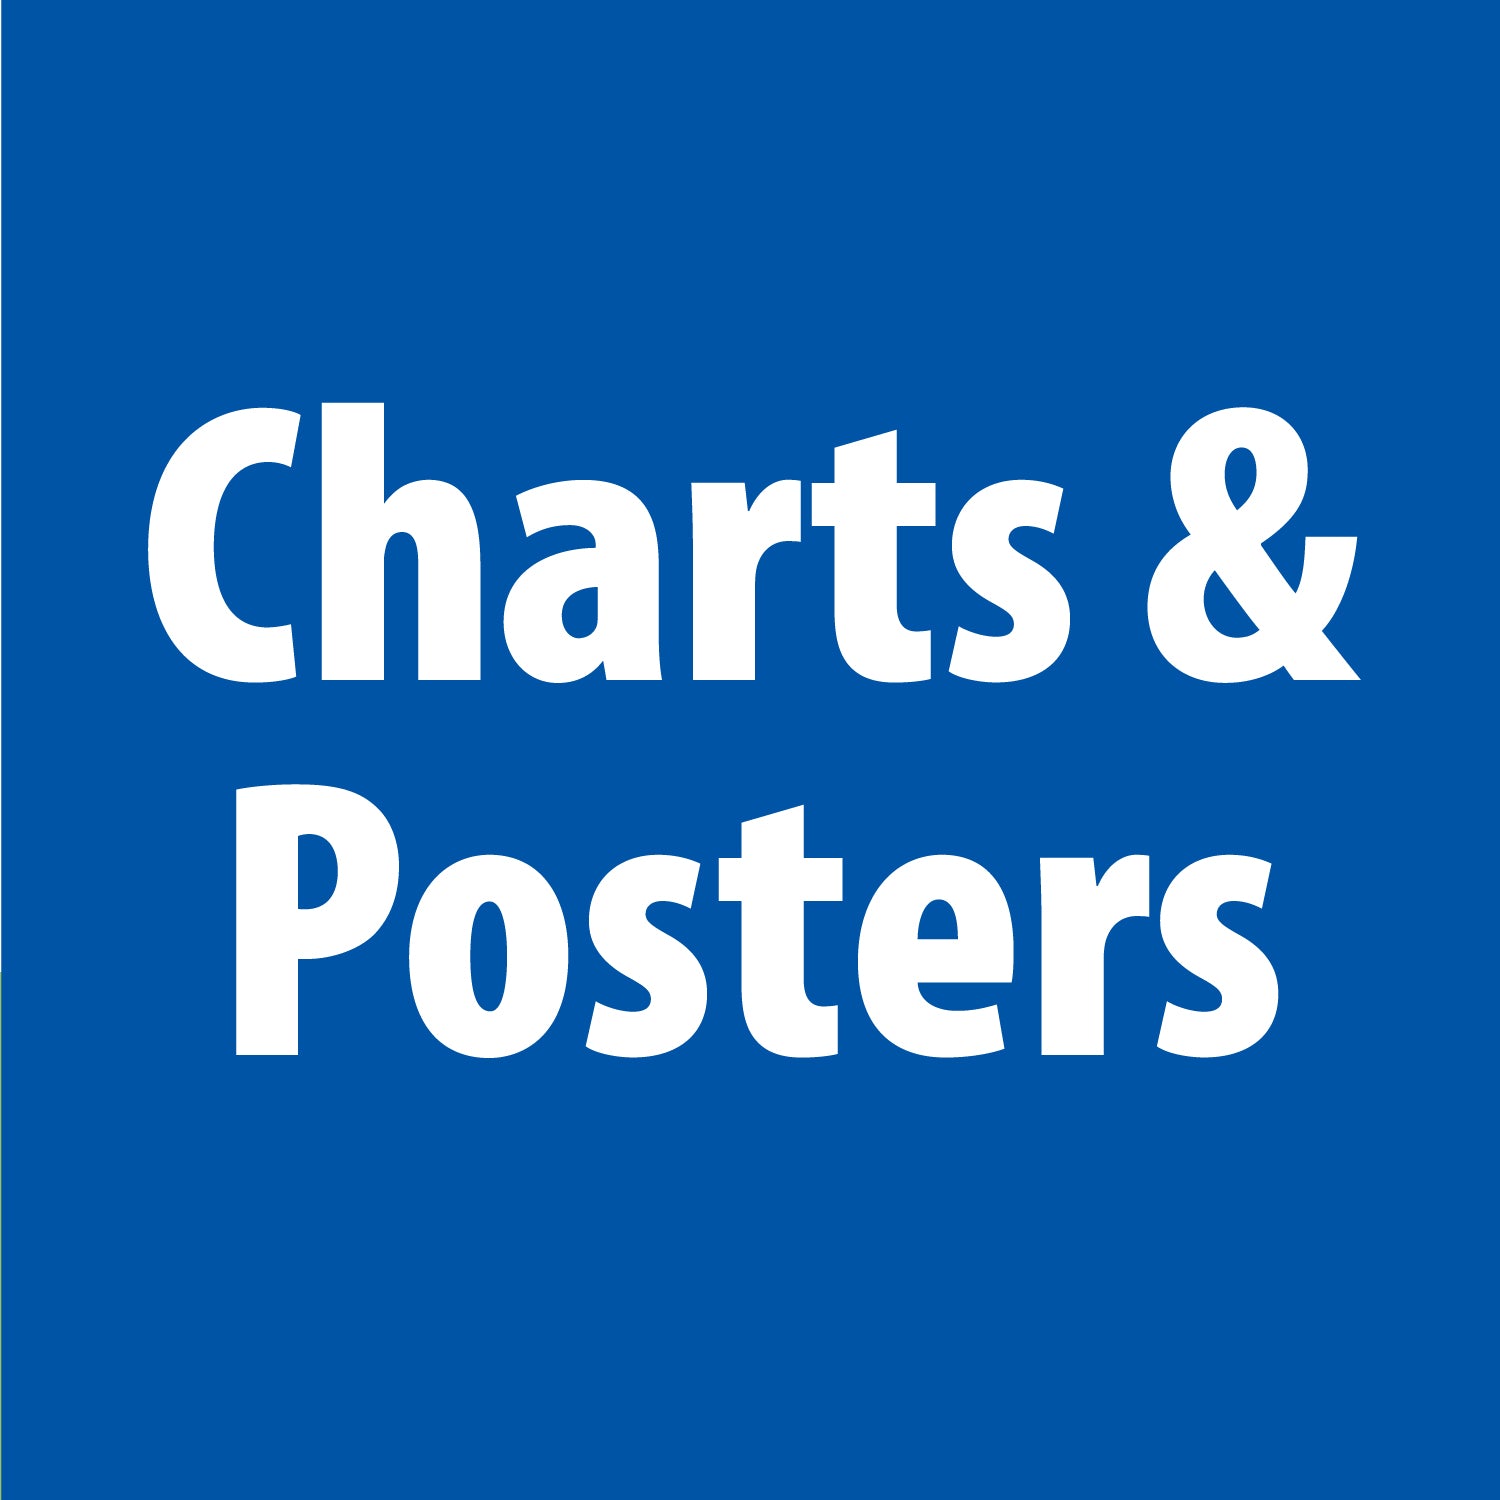 Charts & Posters